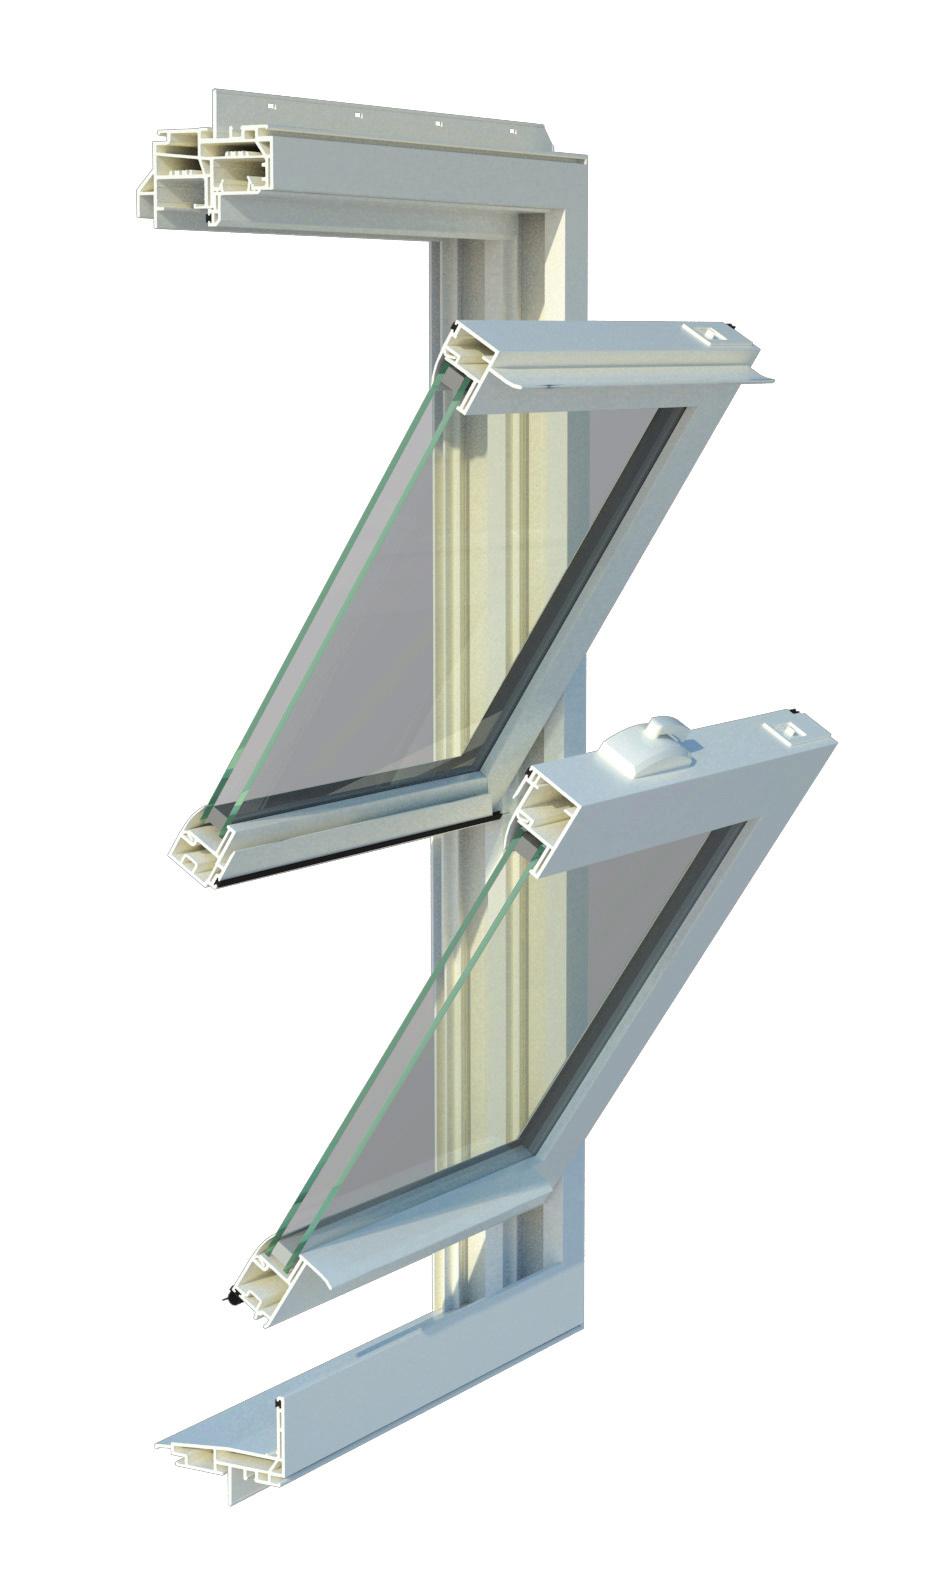 Complies with ASTM and Miami-Dade protocols for impact resistance, while low-e and low-conductance spacers are standard for optimal thermal efficiency E Tilt-In Bottom and Top Sash: Makes cleaning